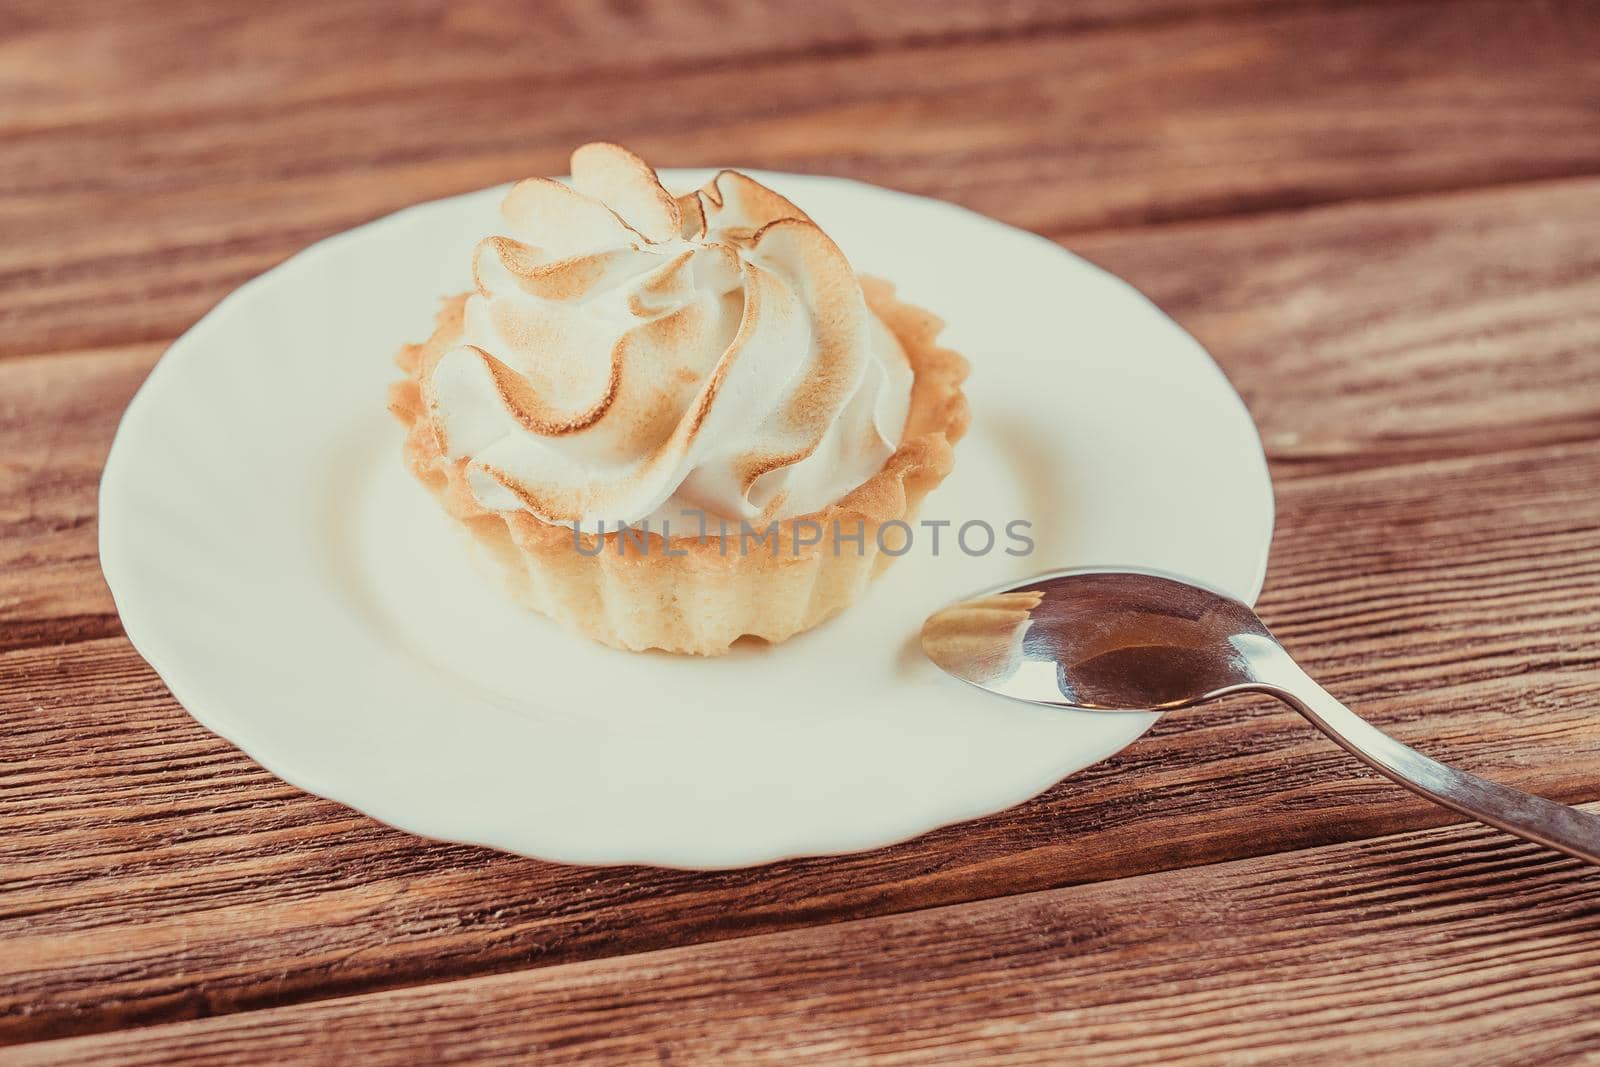 Cupcake with whipped cream on a white saucer with teaspoon on a wooden table.